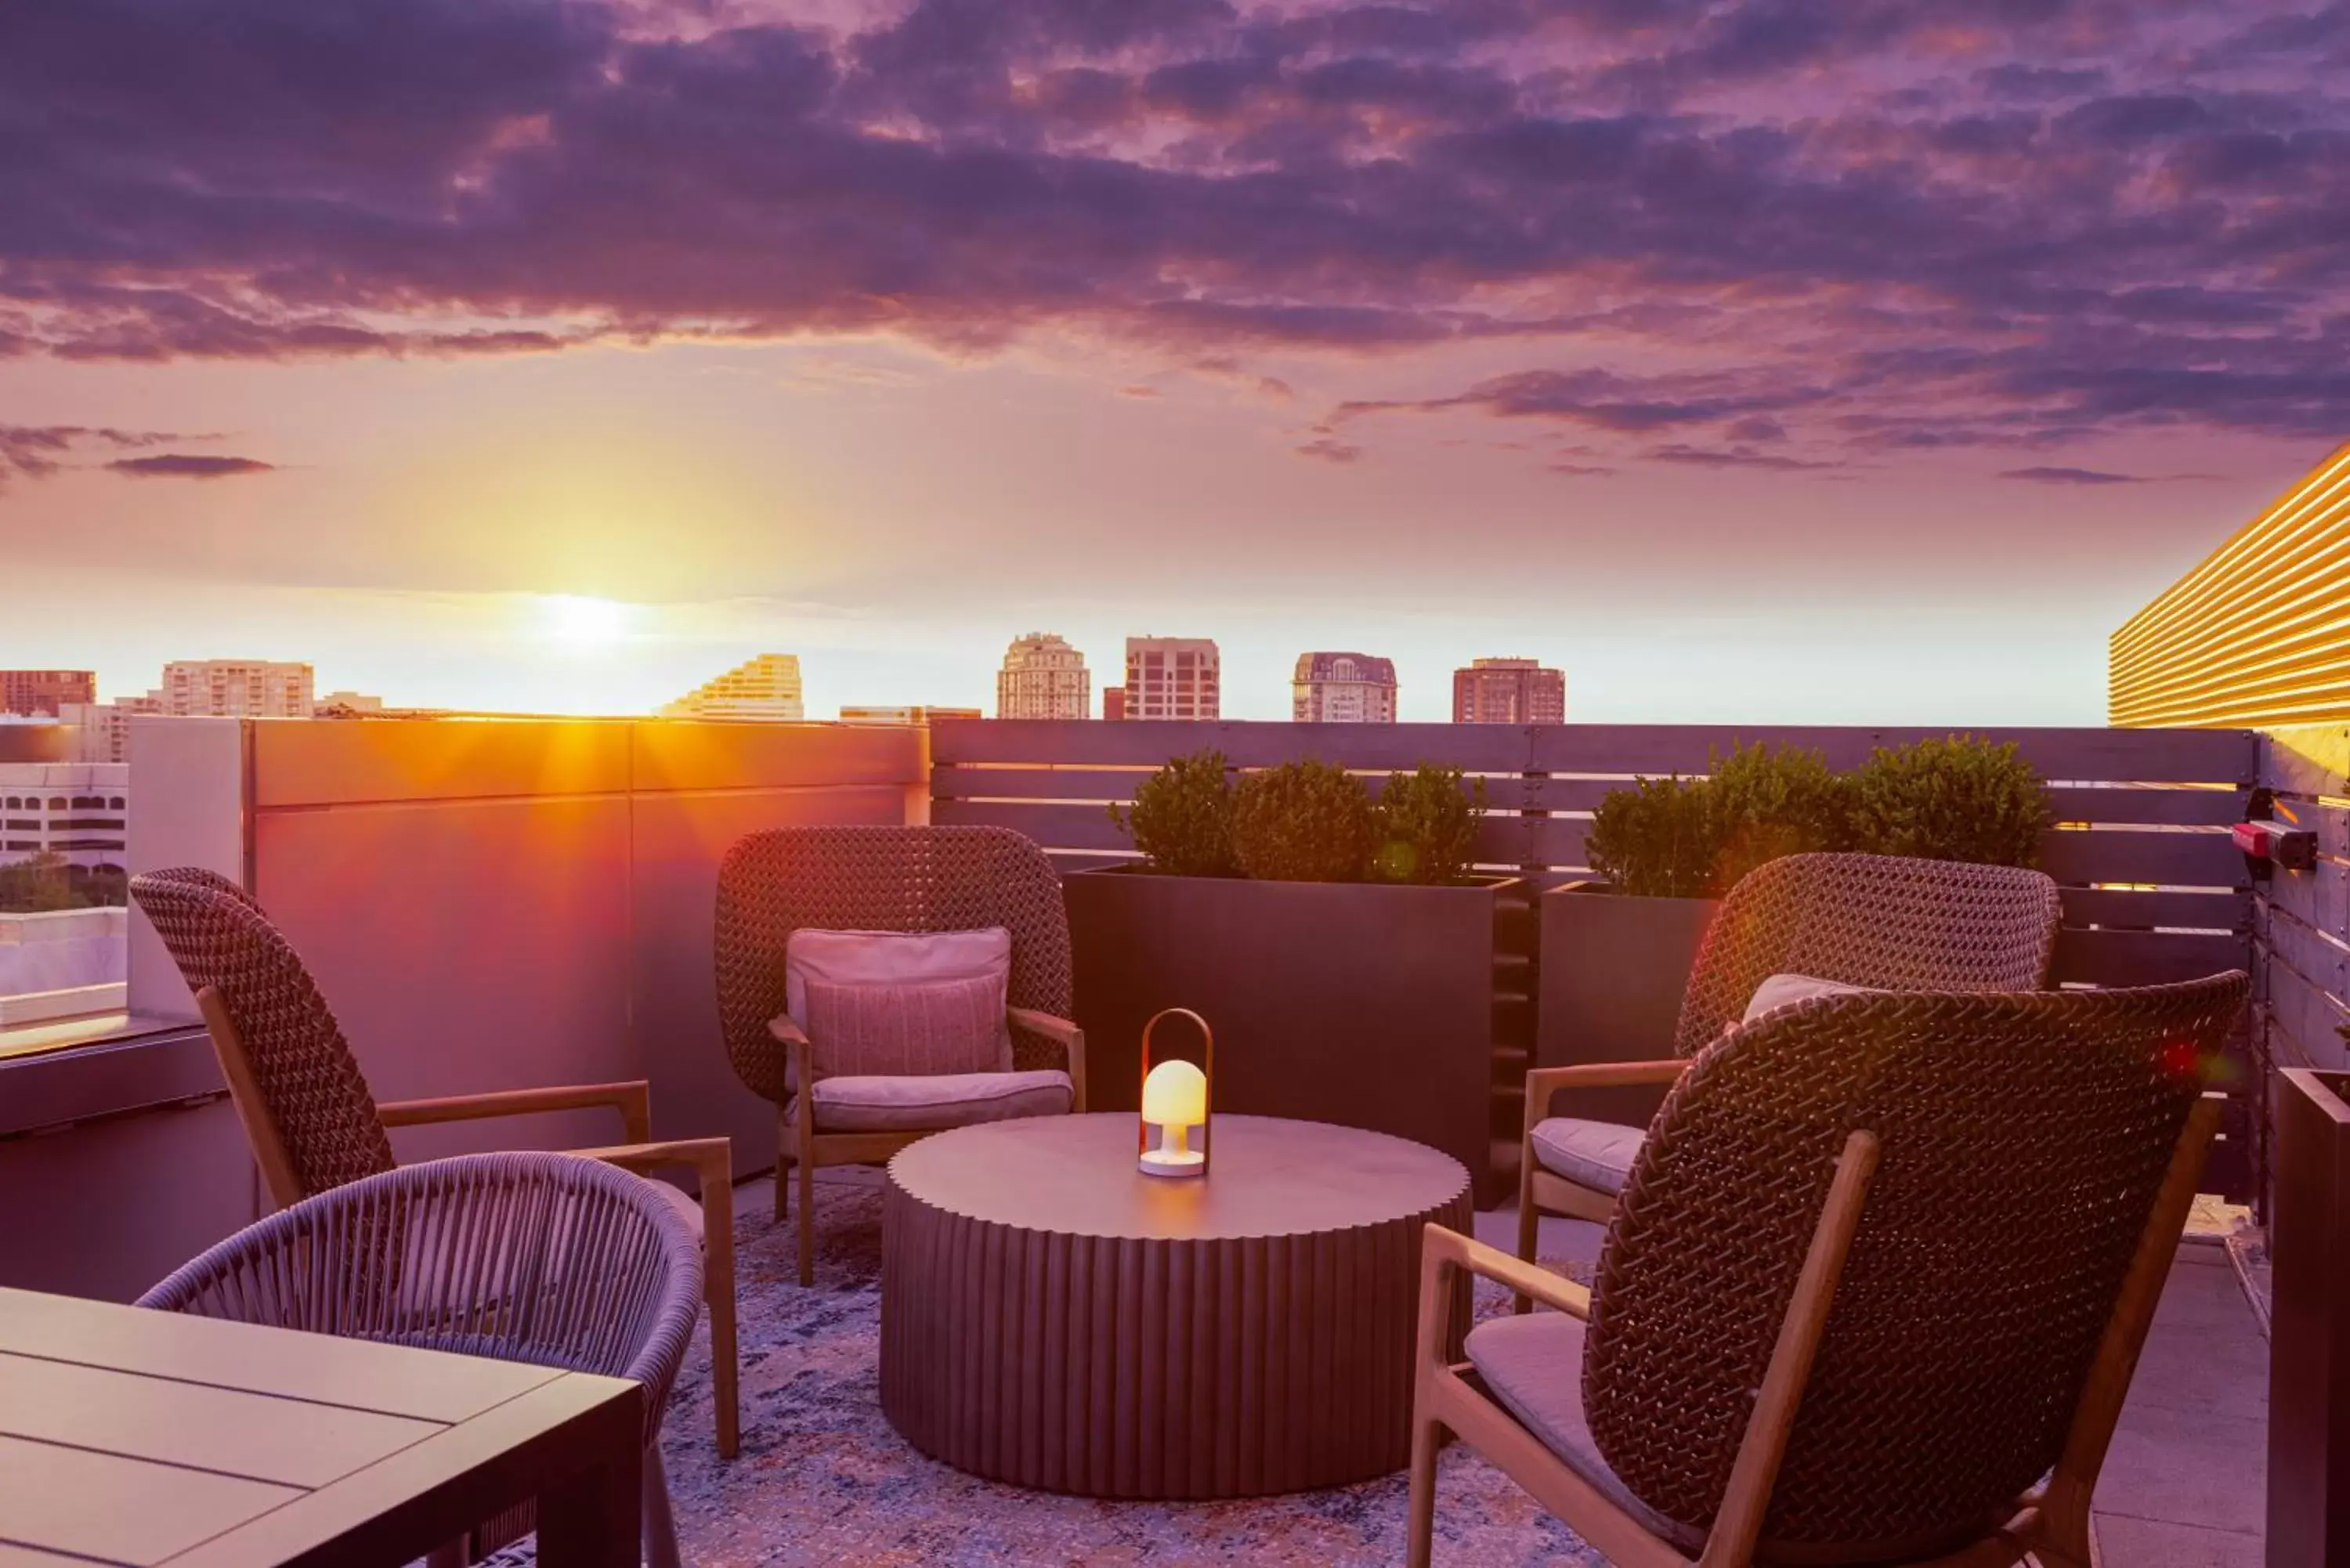 Restaurant/places to eat, Sunrise/Sunset in Canopy By Hilton Dallas Uptown